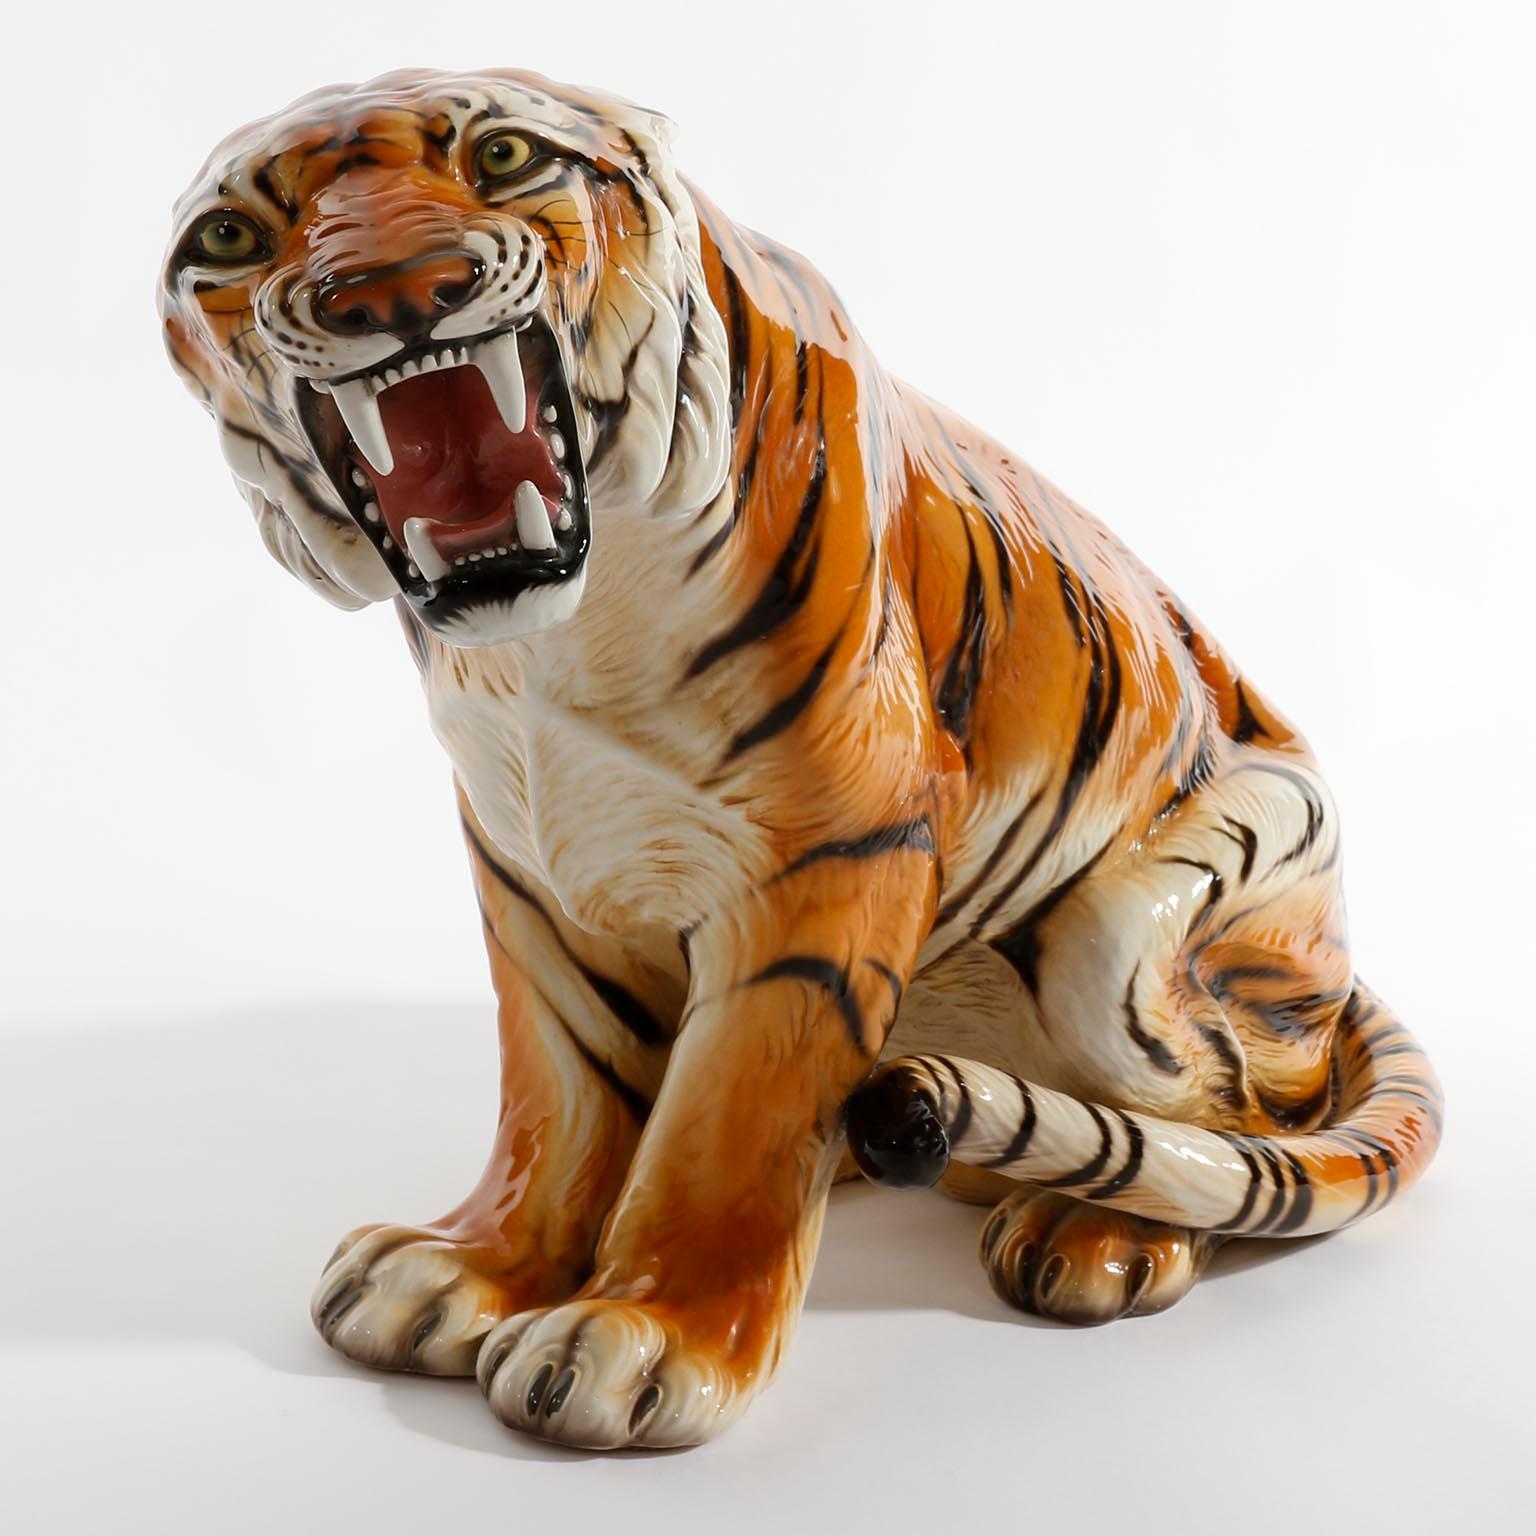 A painted and glazed ceramic tiger sculpture by Ronzan, Italy, 1950s.
A gorgeous piece with great details.
The white areas on the photos are reflections of the artificial light from the photo studio.